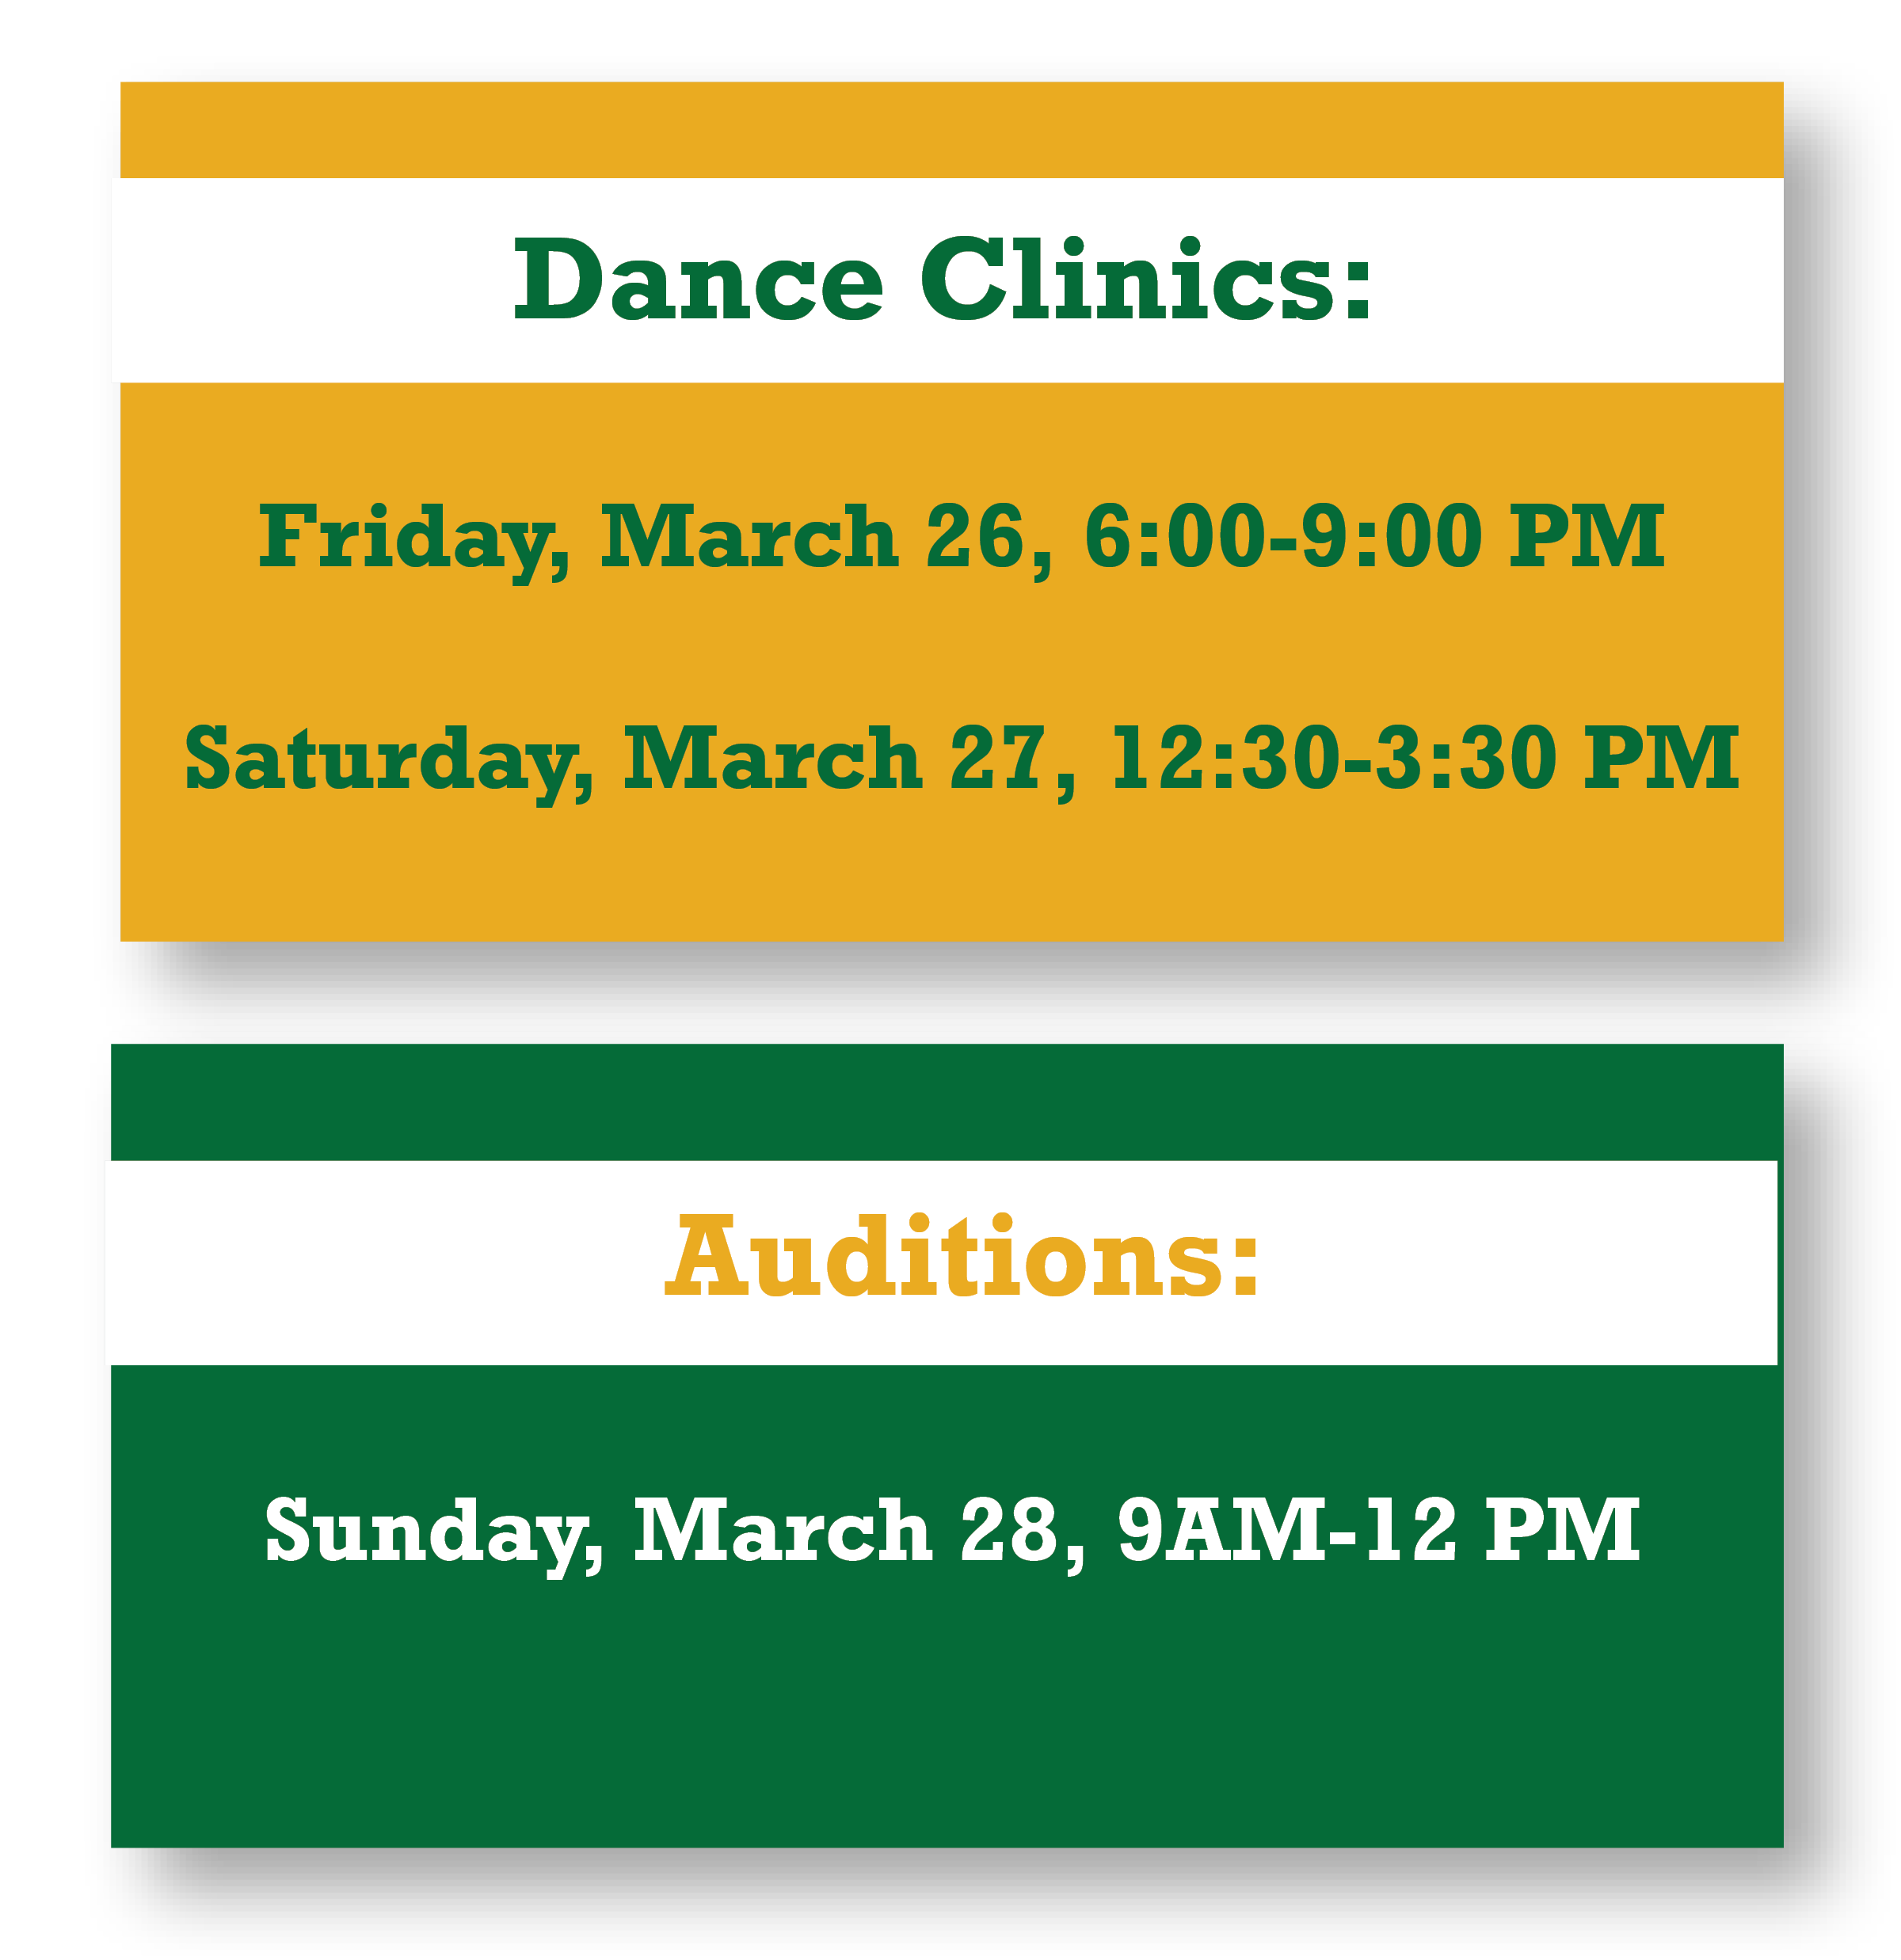 Dance Clinic - Friday, March 26, 6:00-9:00 PM Dance Clinic - Saturday, March 27, 12:30-3:30 PM Auditions - Sunday, March 28, 9AM-12 PM